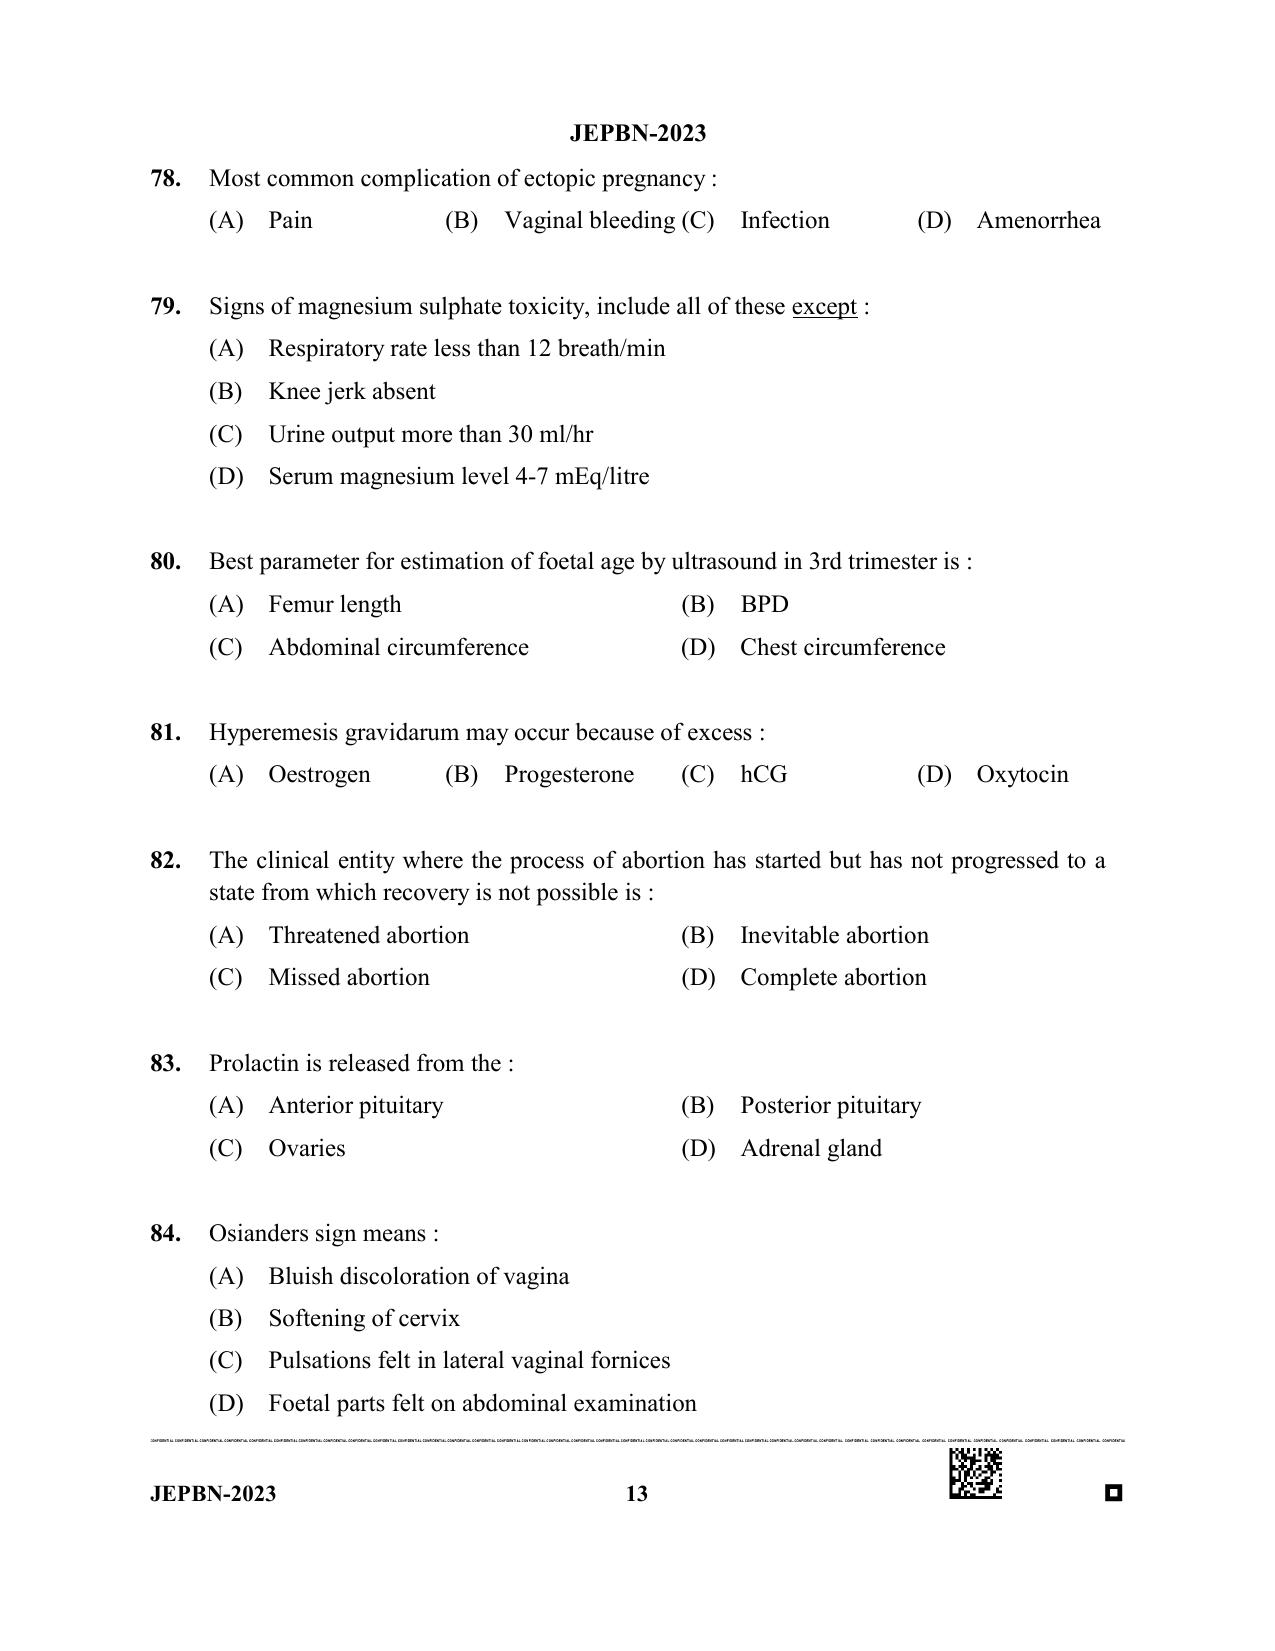 WBJEE JEPBN 2023 Question Paper - Page 13